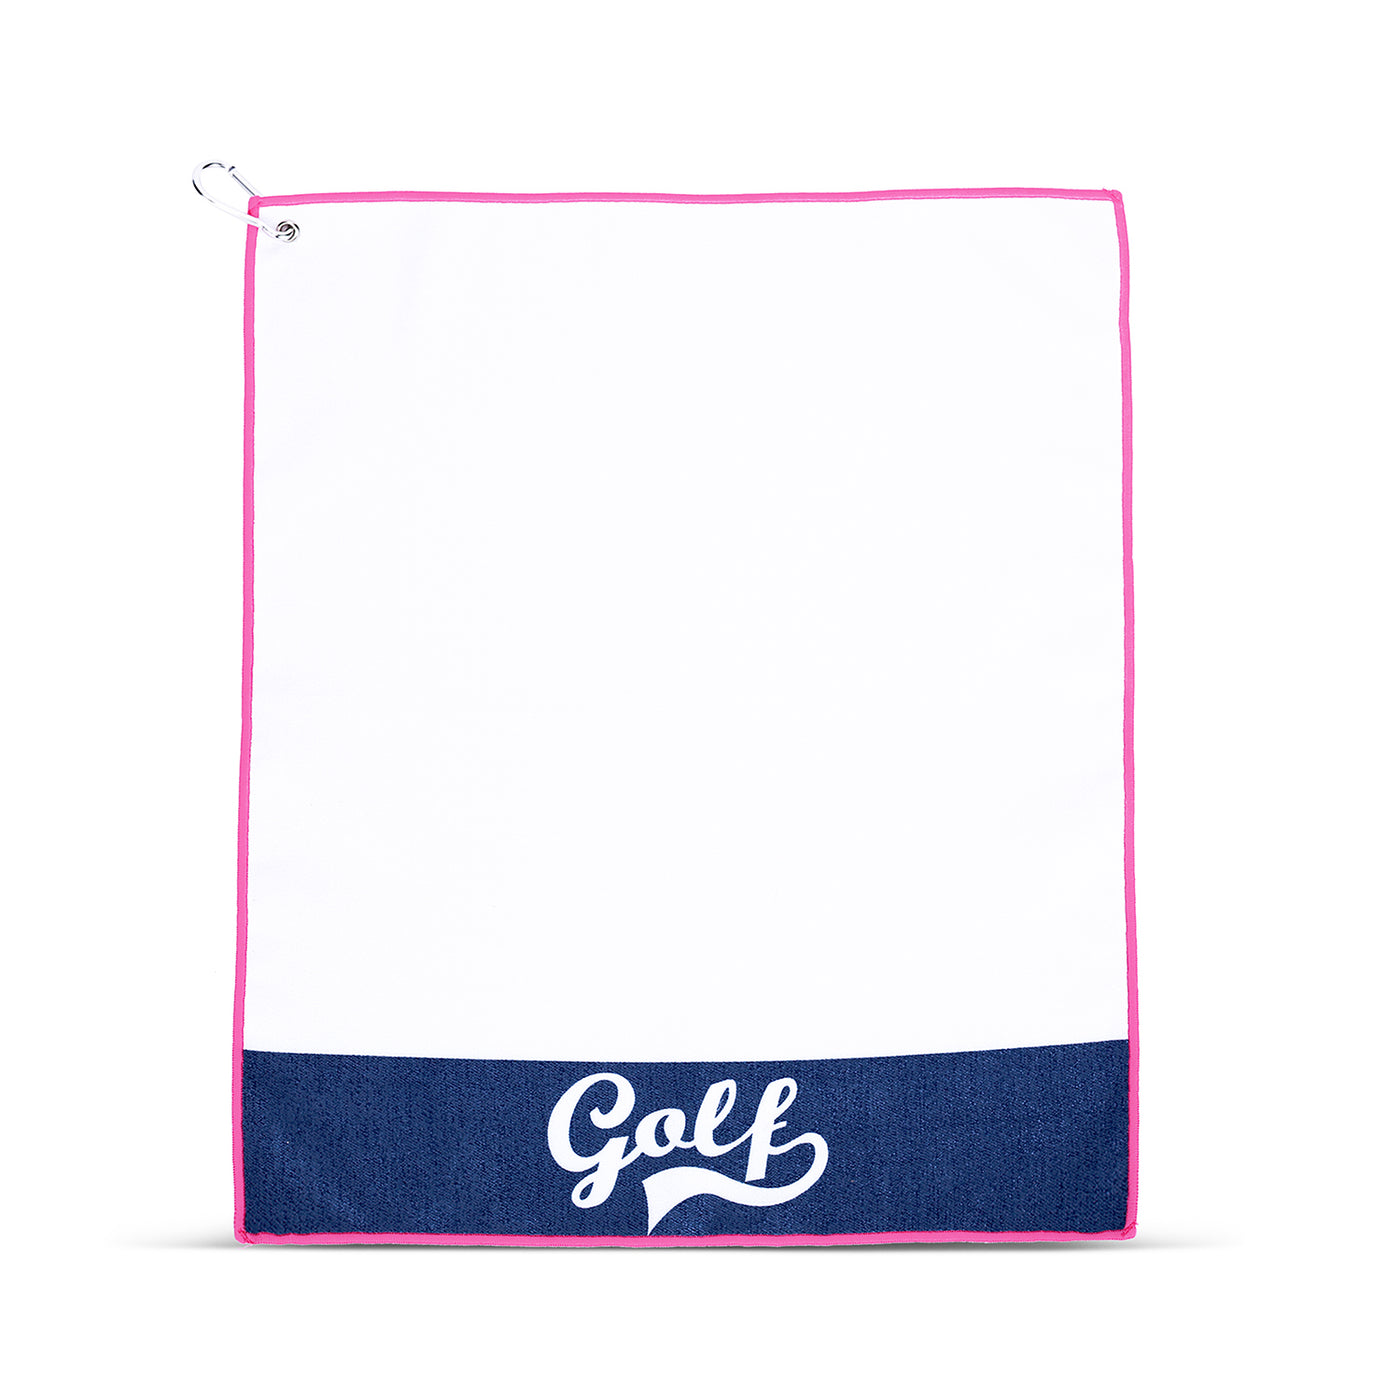 white towel with navy stripe and golf text